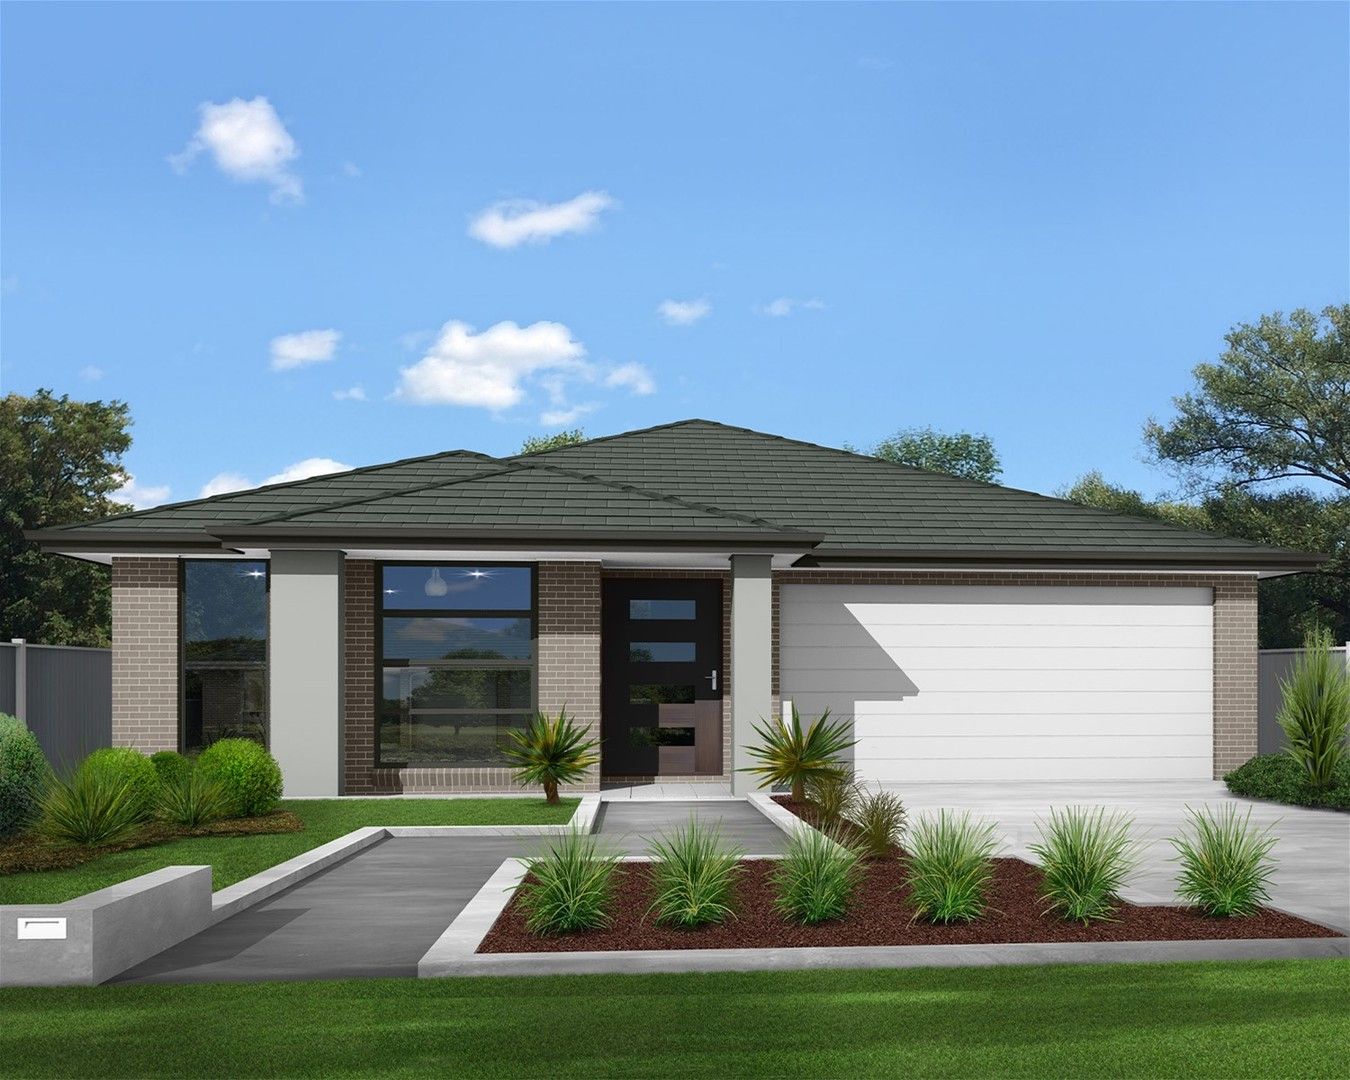 4 bedrooms New House & Land in Lot 54 Rinanna Place ST GEORGES BASIN NSW, 2540